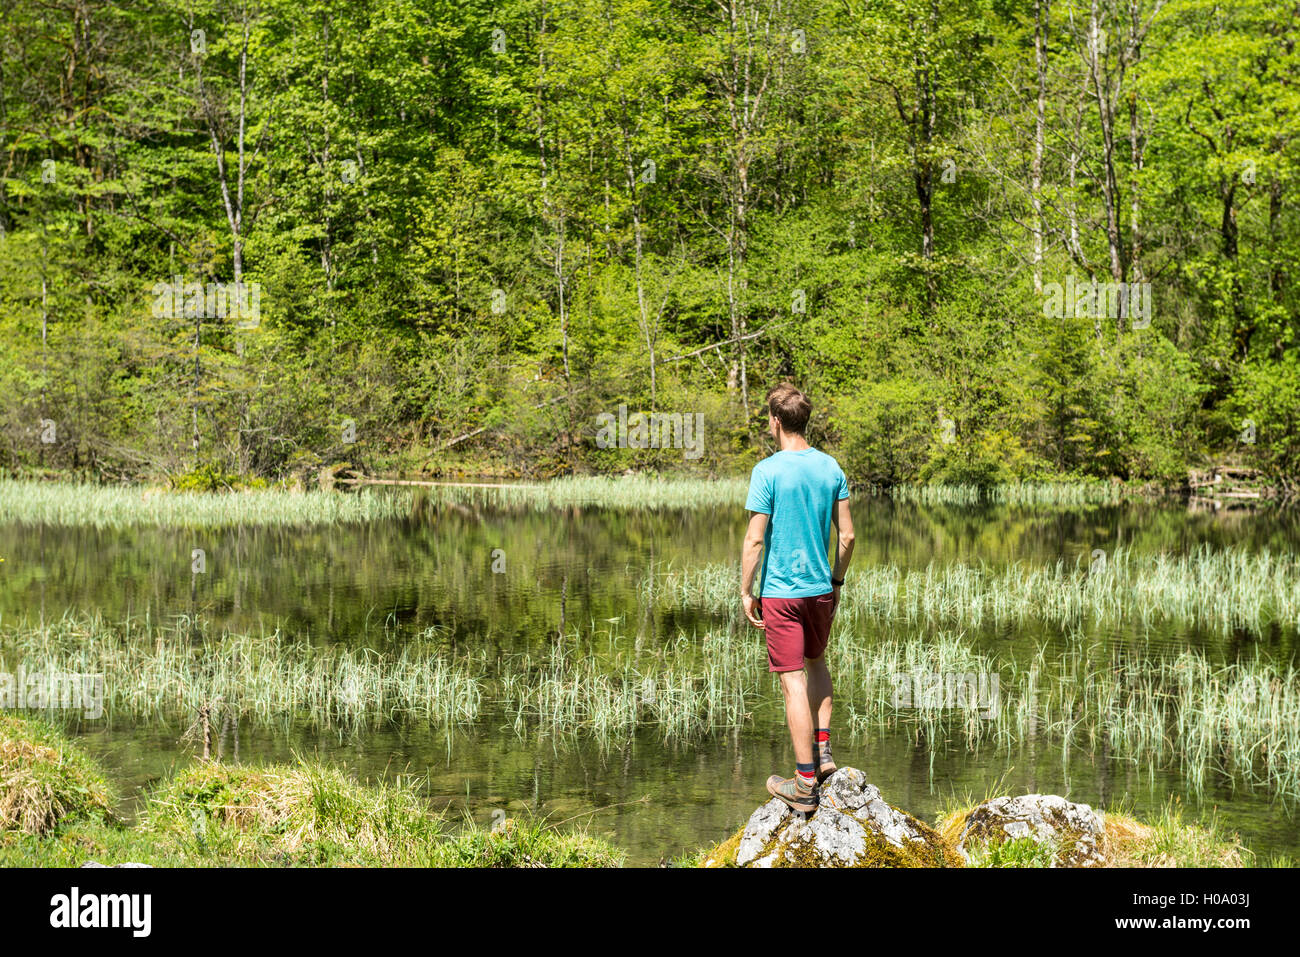 Young man standing on stone at lake, Mittersee, Salet am Königssee, National Park Berchtesgaden, Berchtesgadener Land Stock Photo